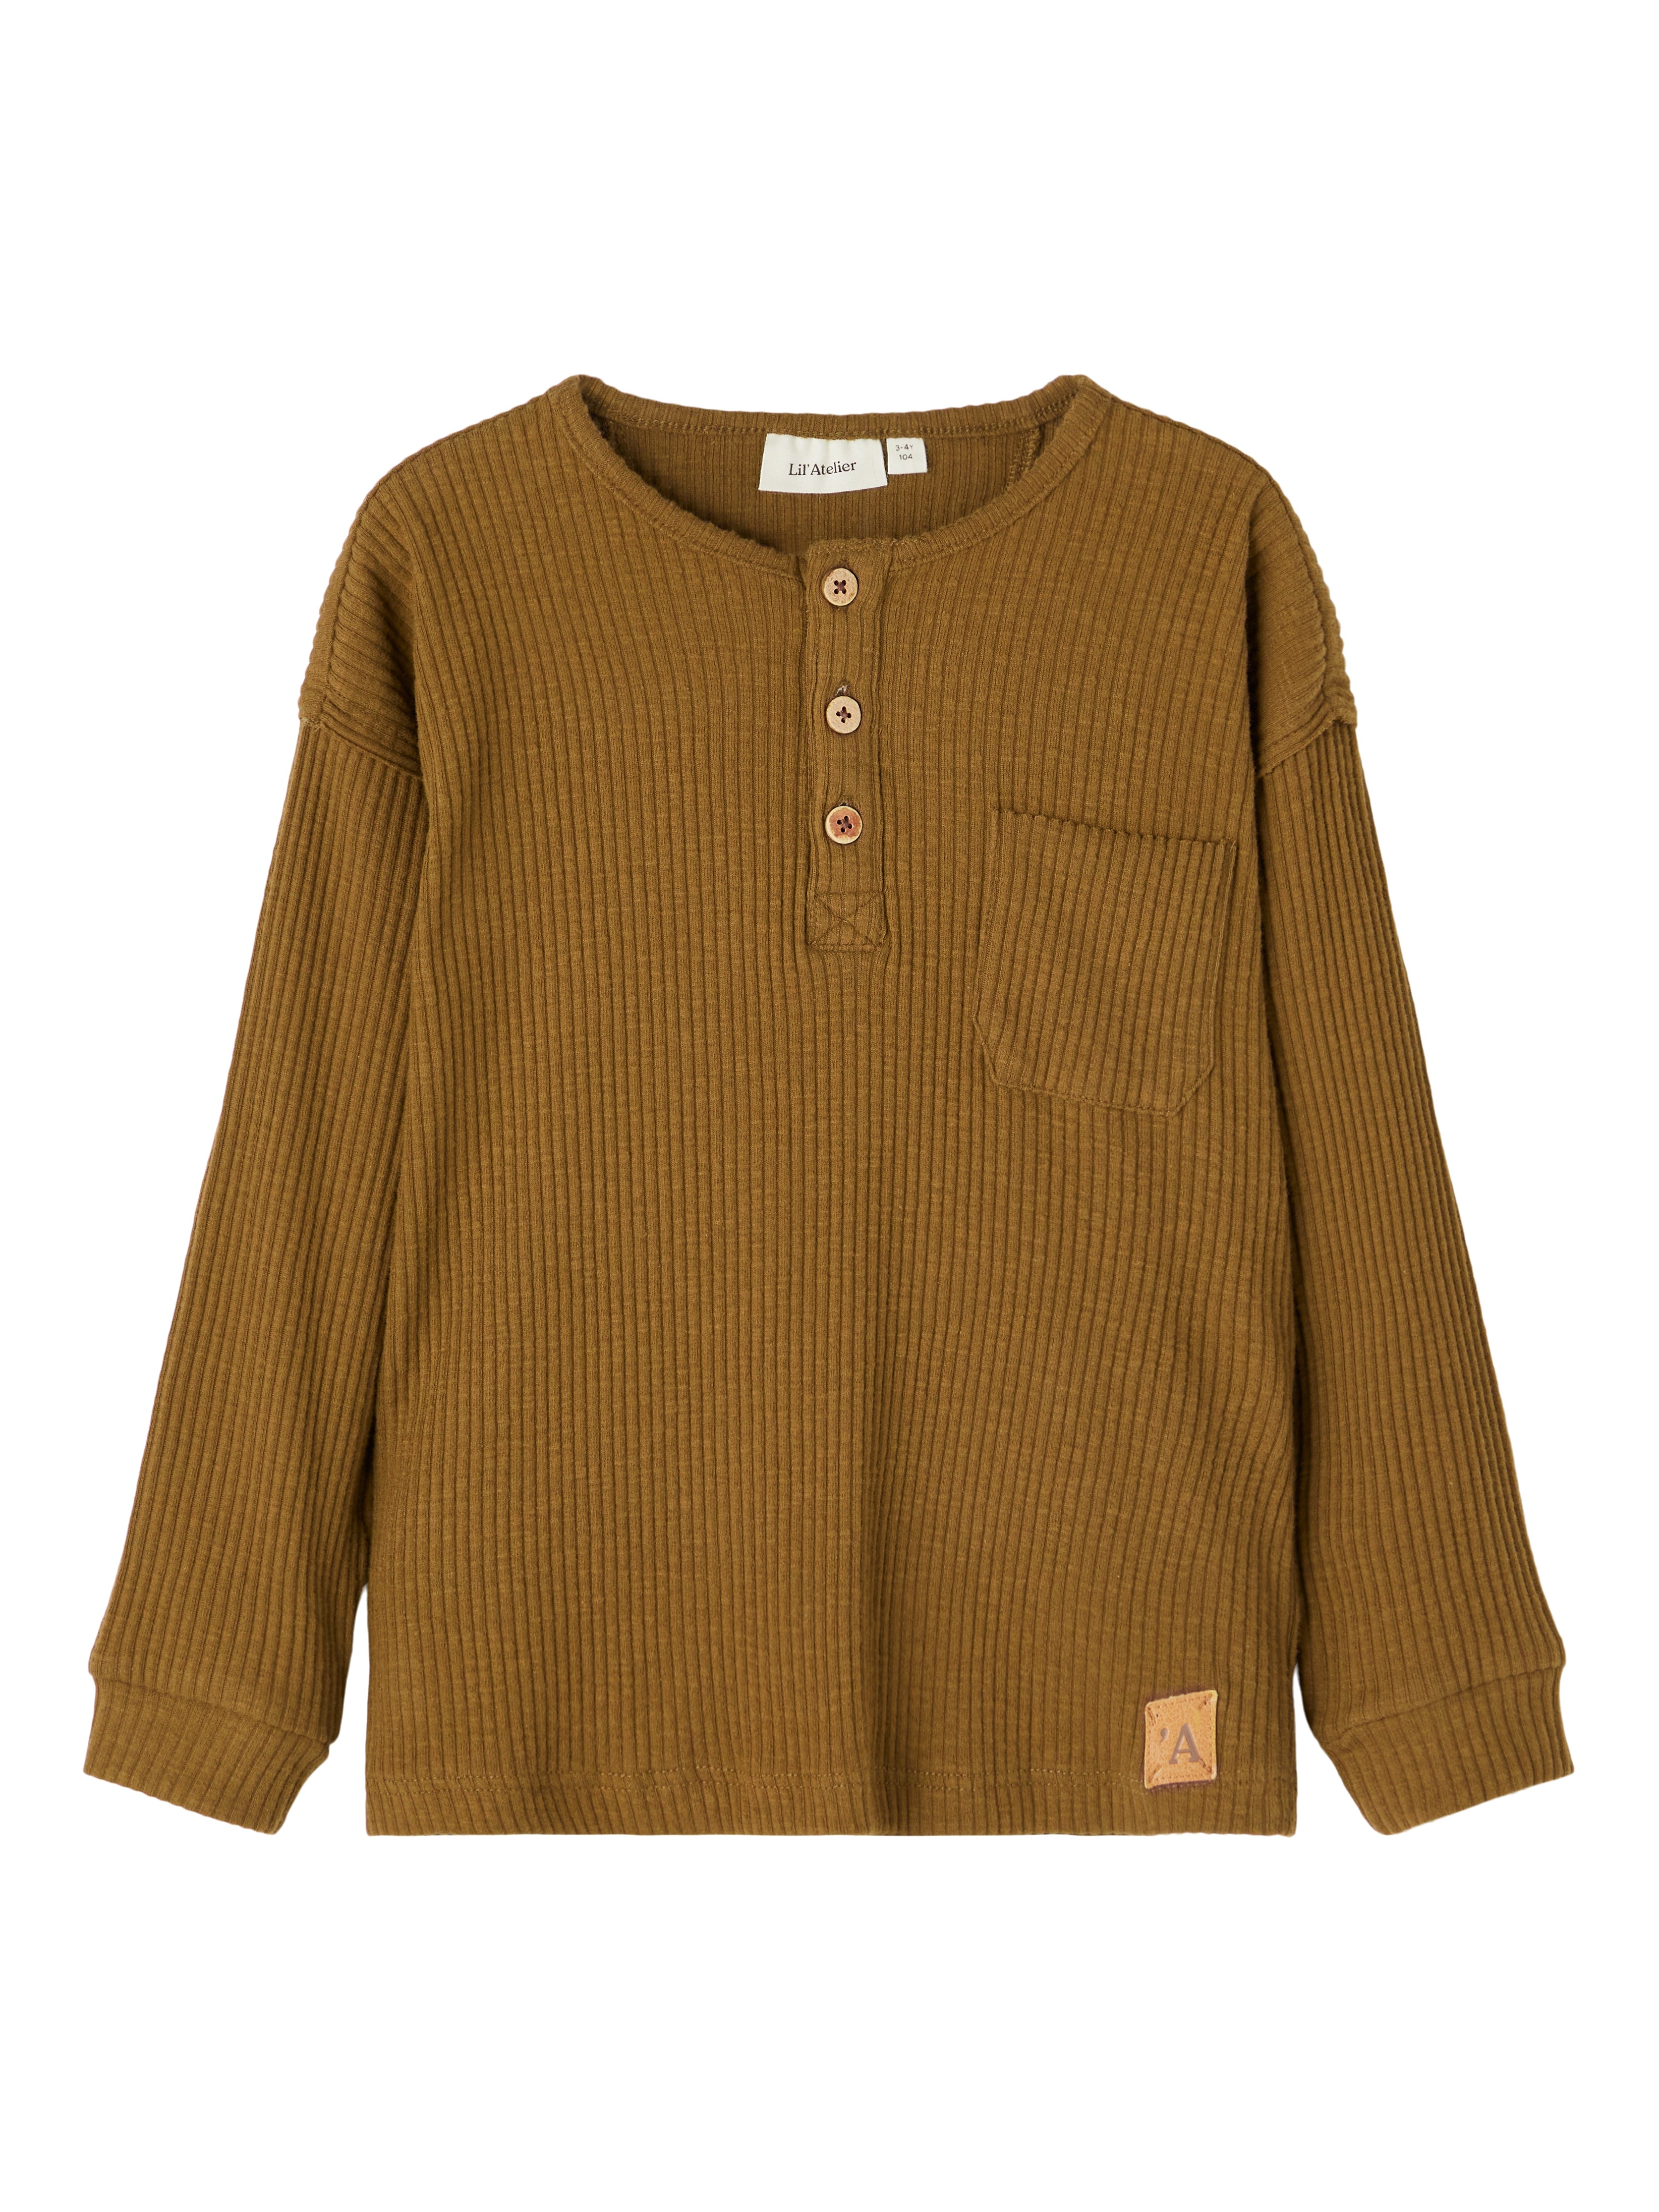 Lil Atelier Rajo Boxy Top Golden Brown